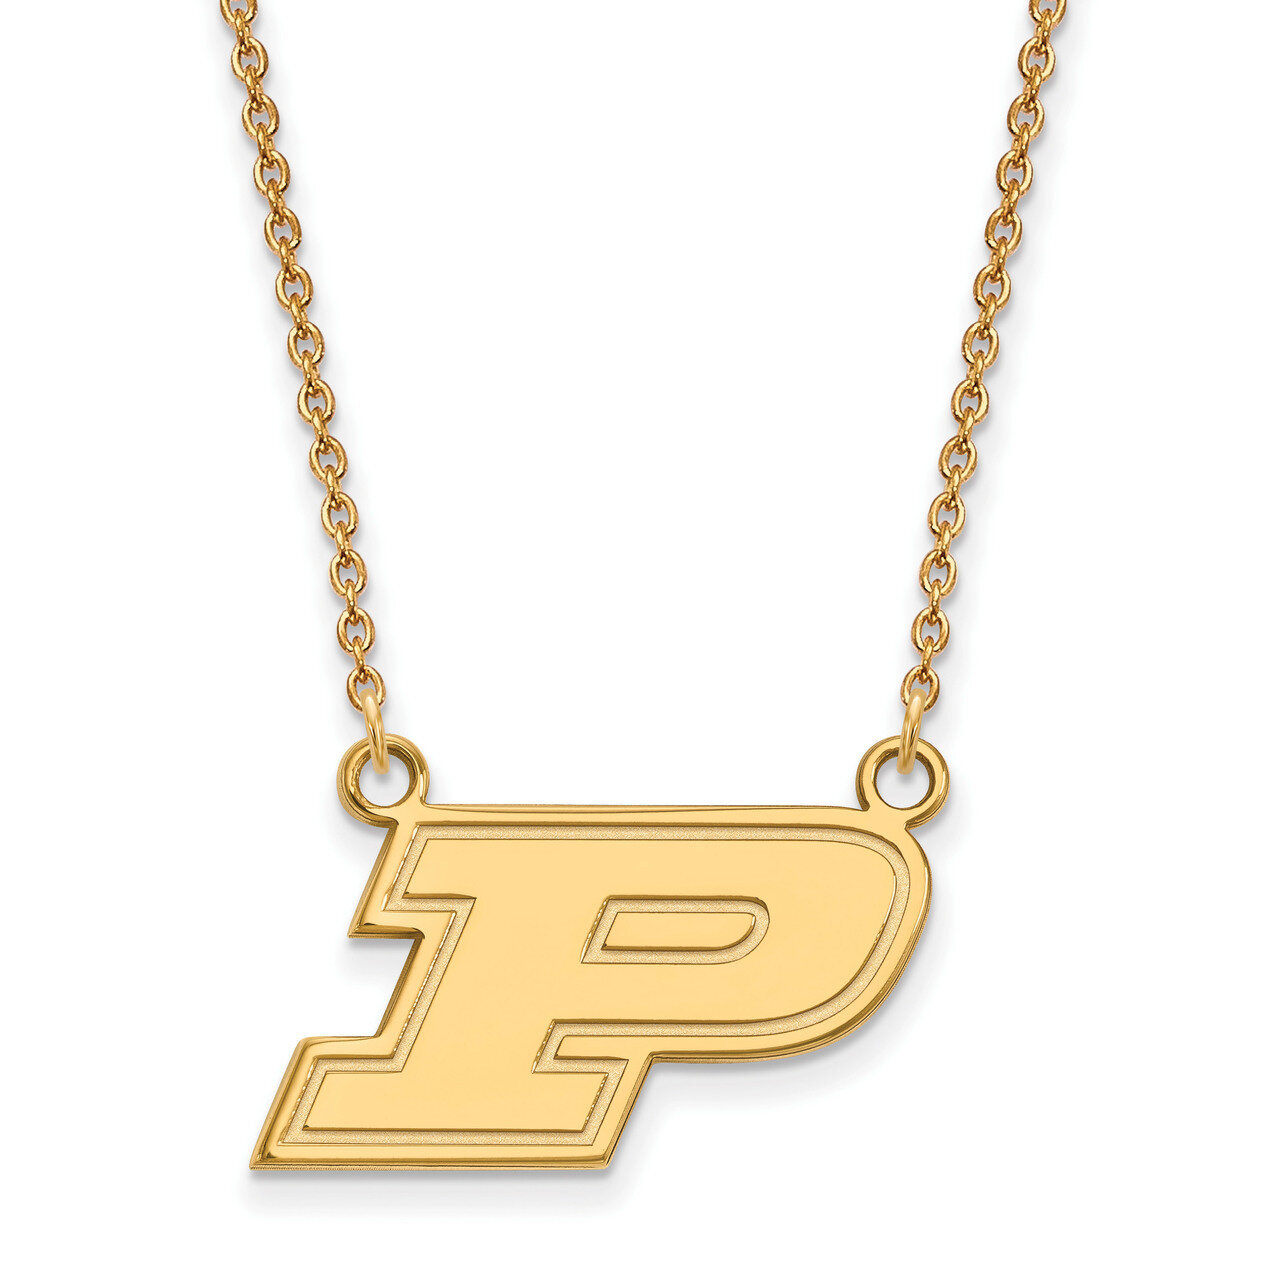 Purdue Small Pendant with Necklace 10k Yellow Gold 1Y014PU-18